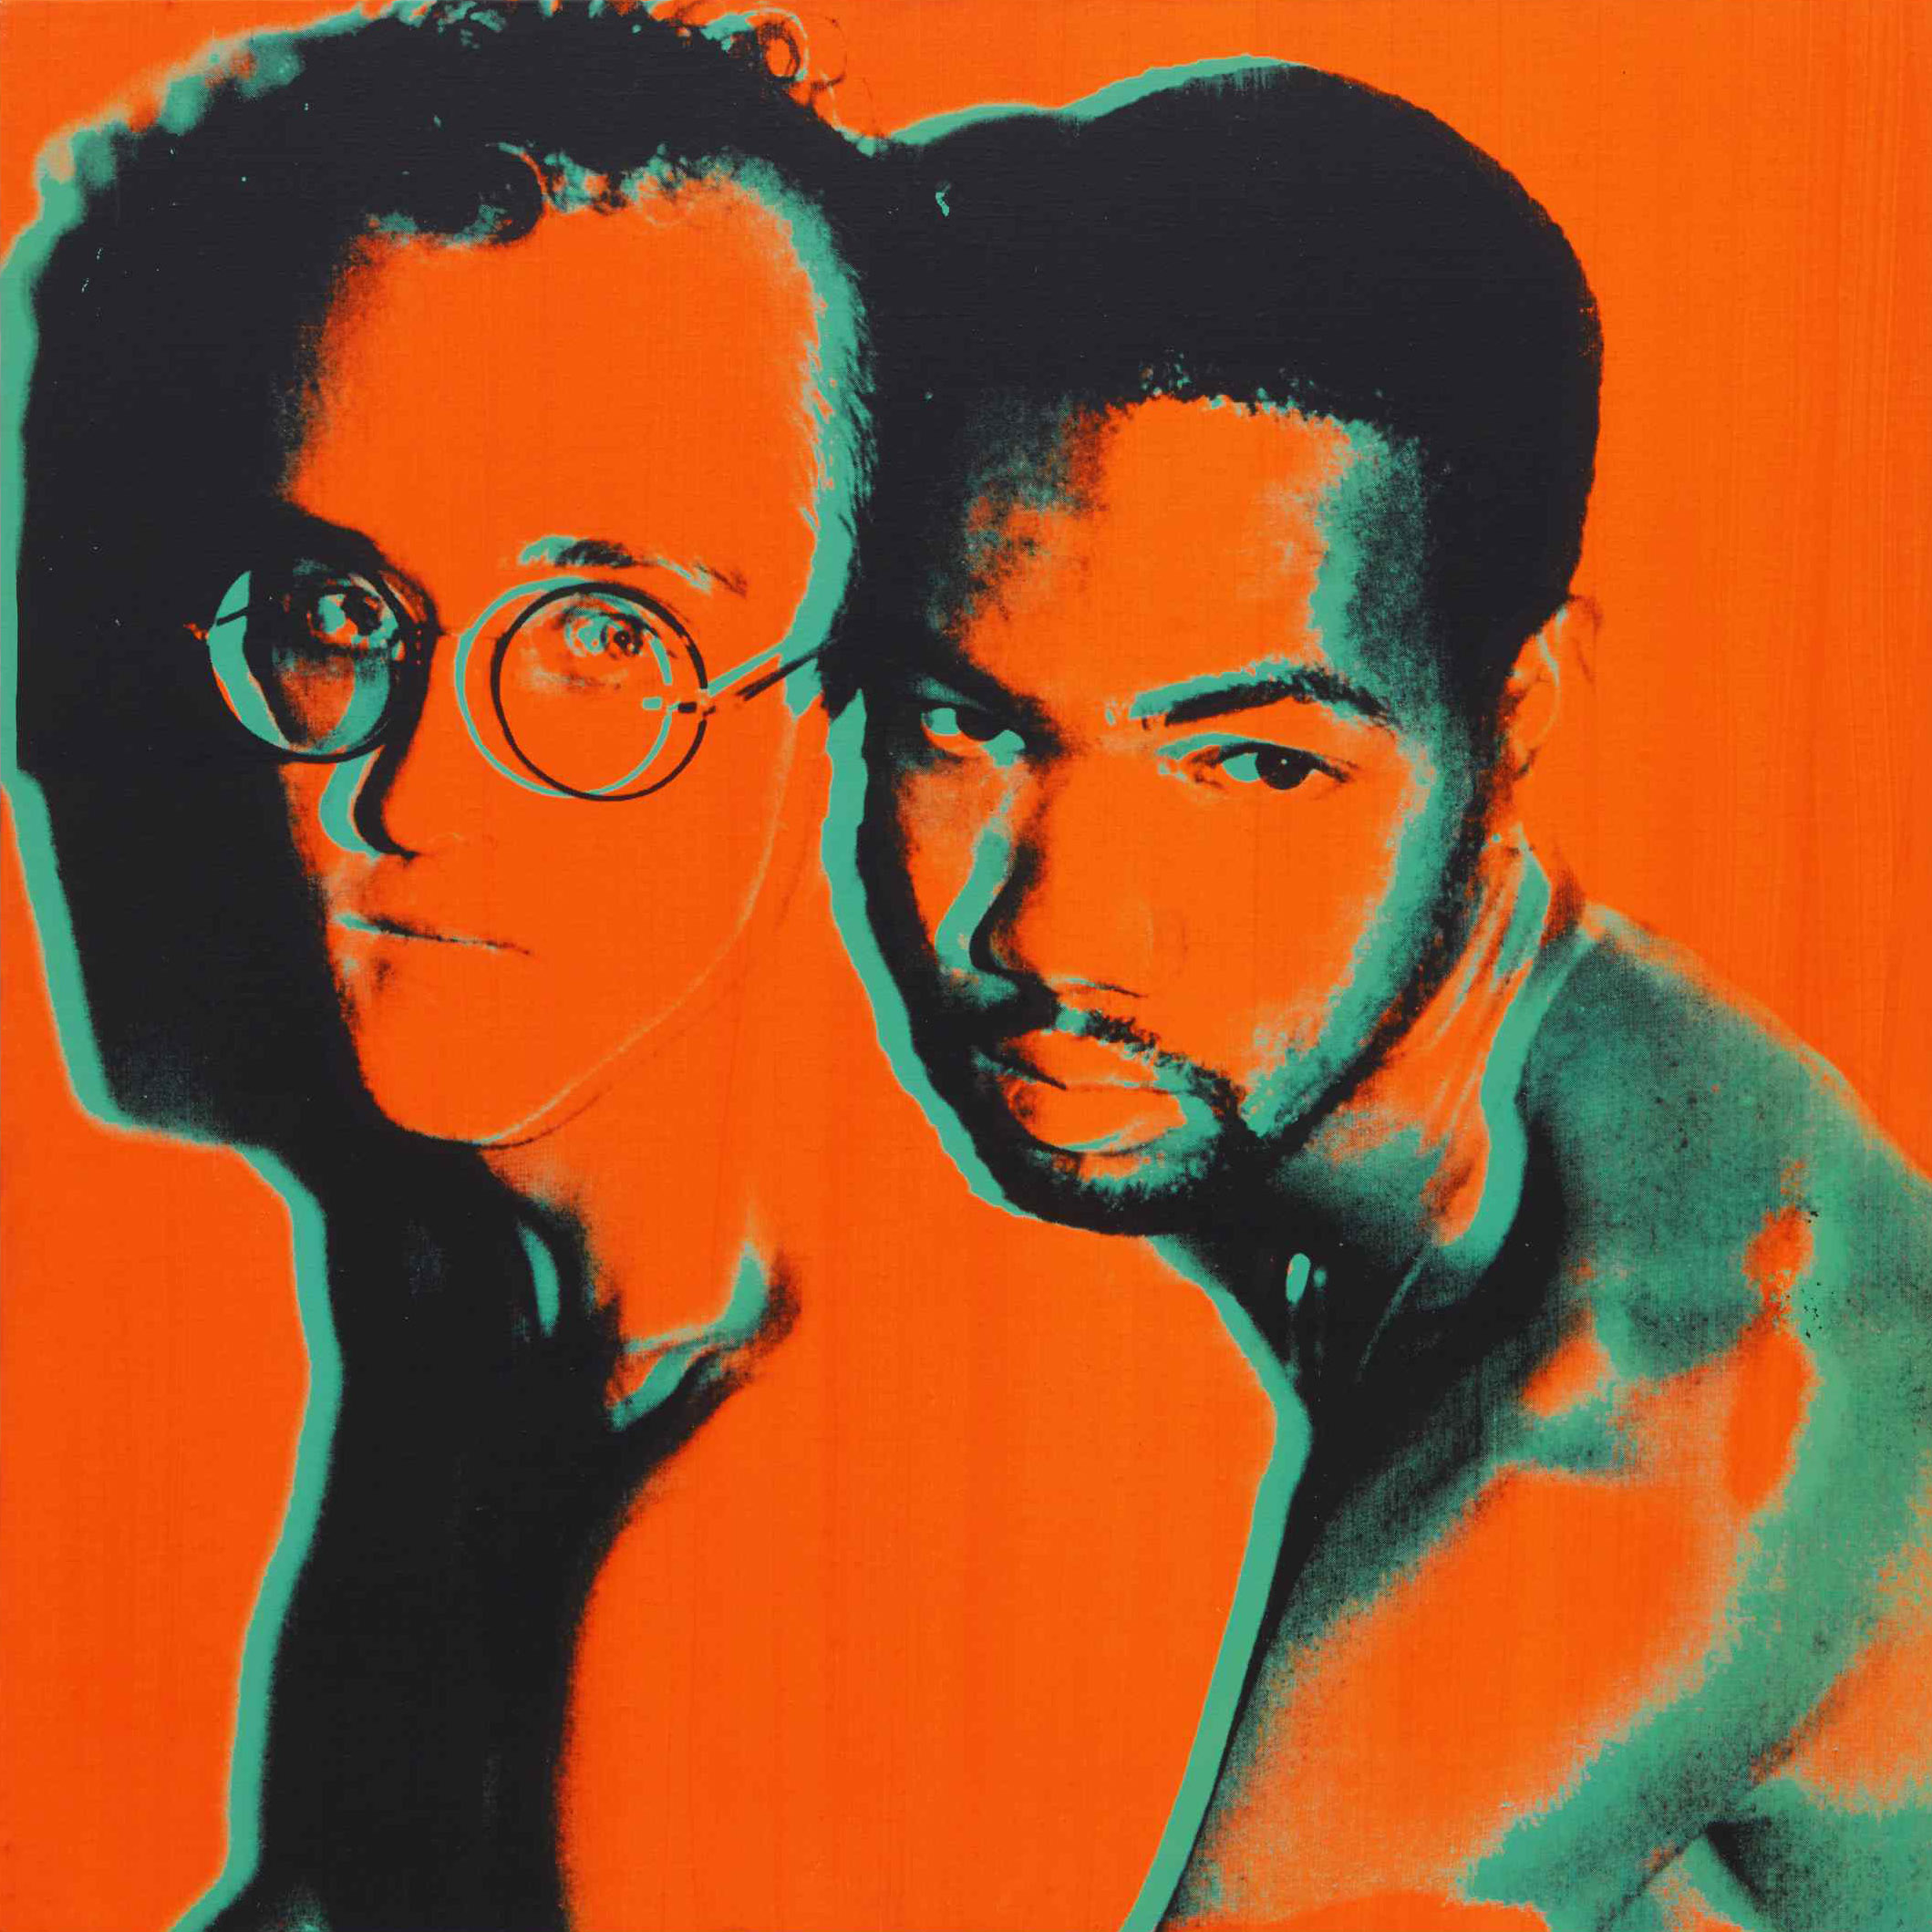 Untitled portrait of Keith Haring and Juan DuBose by Andy Warhol